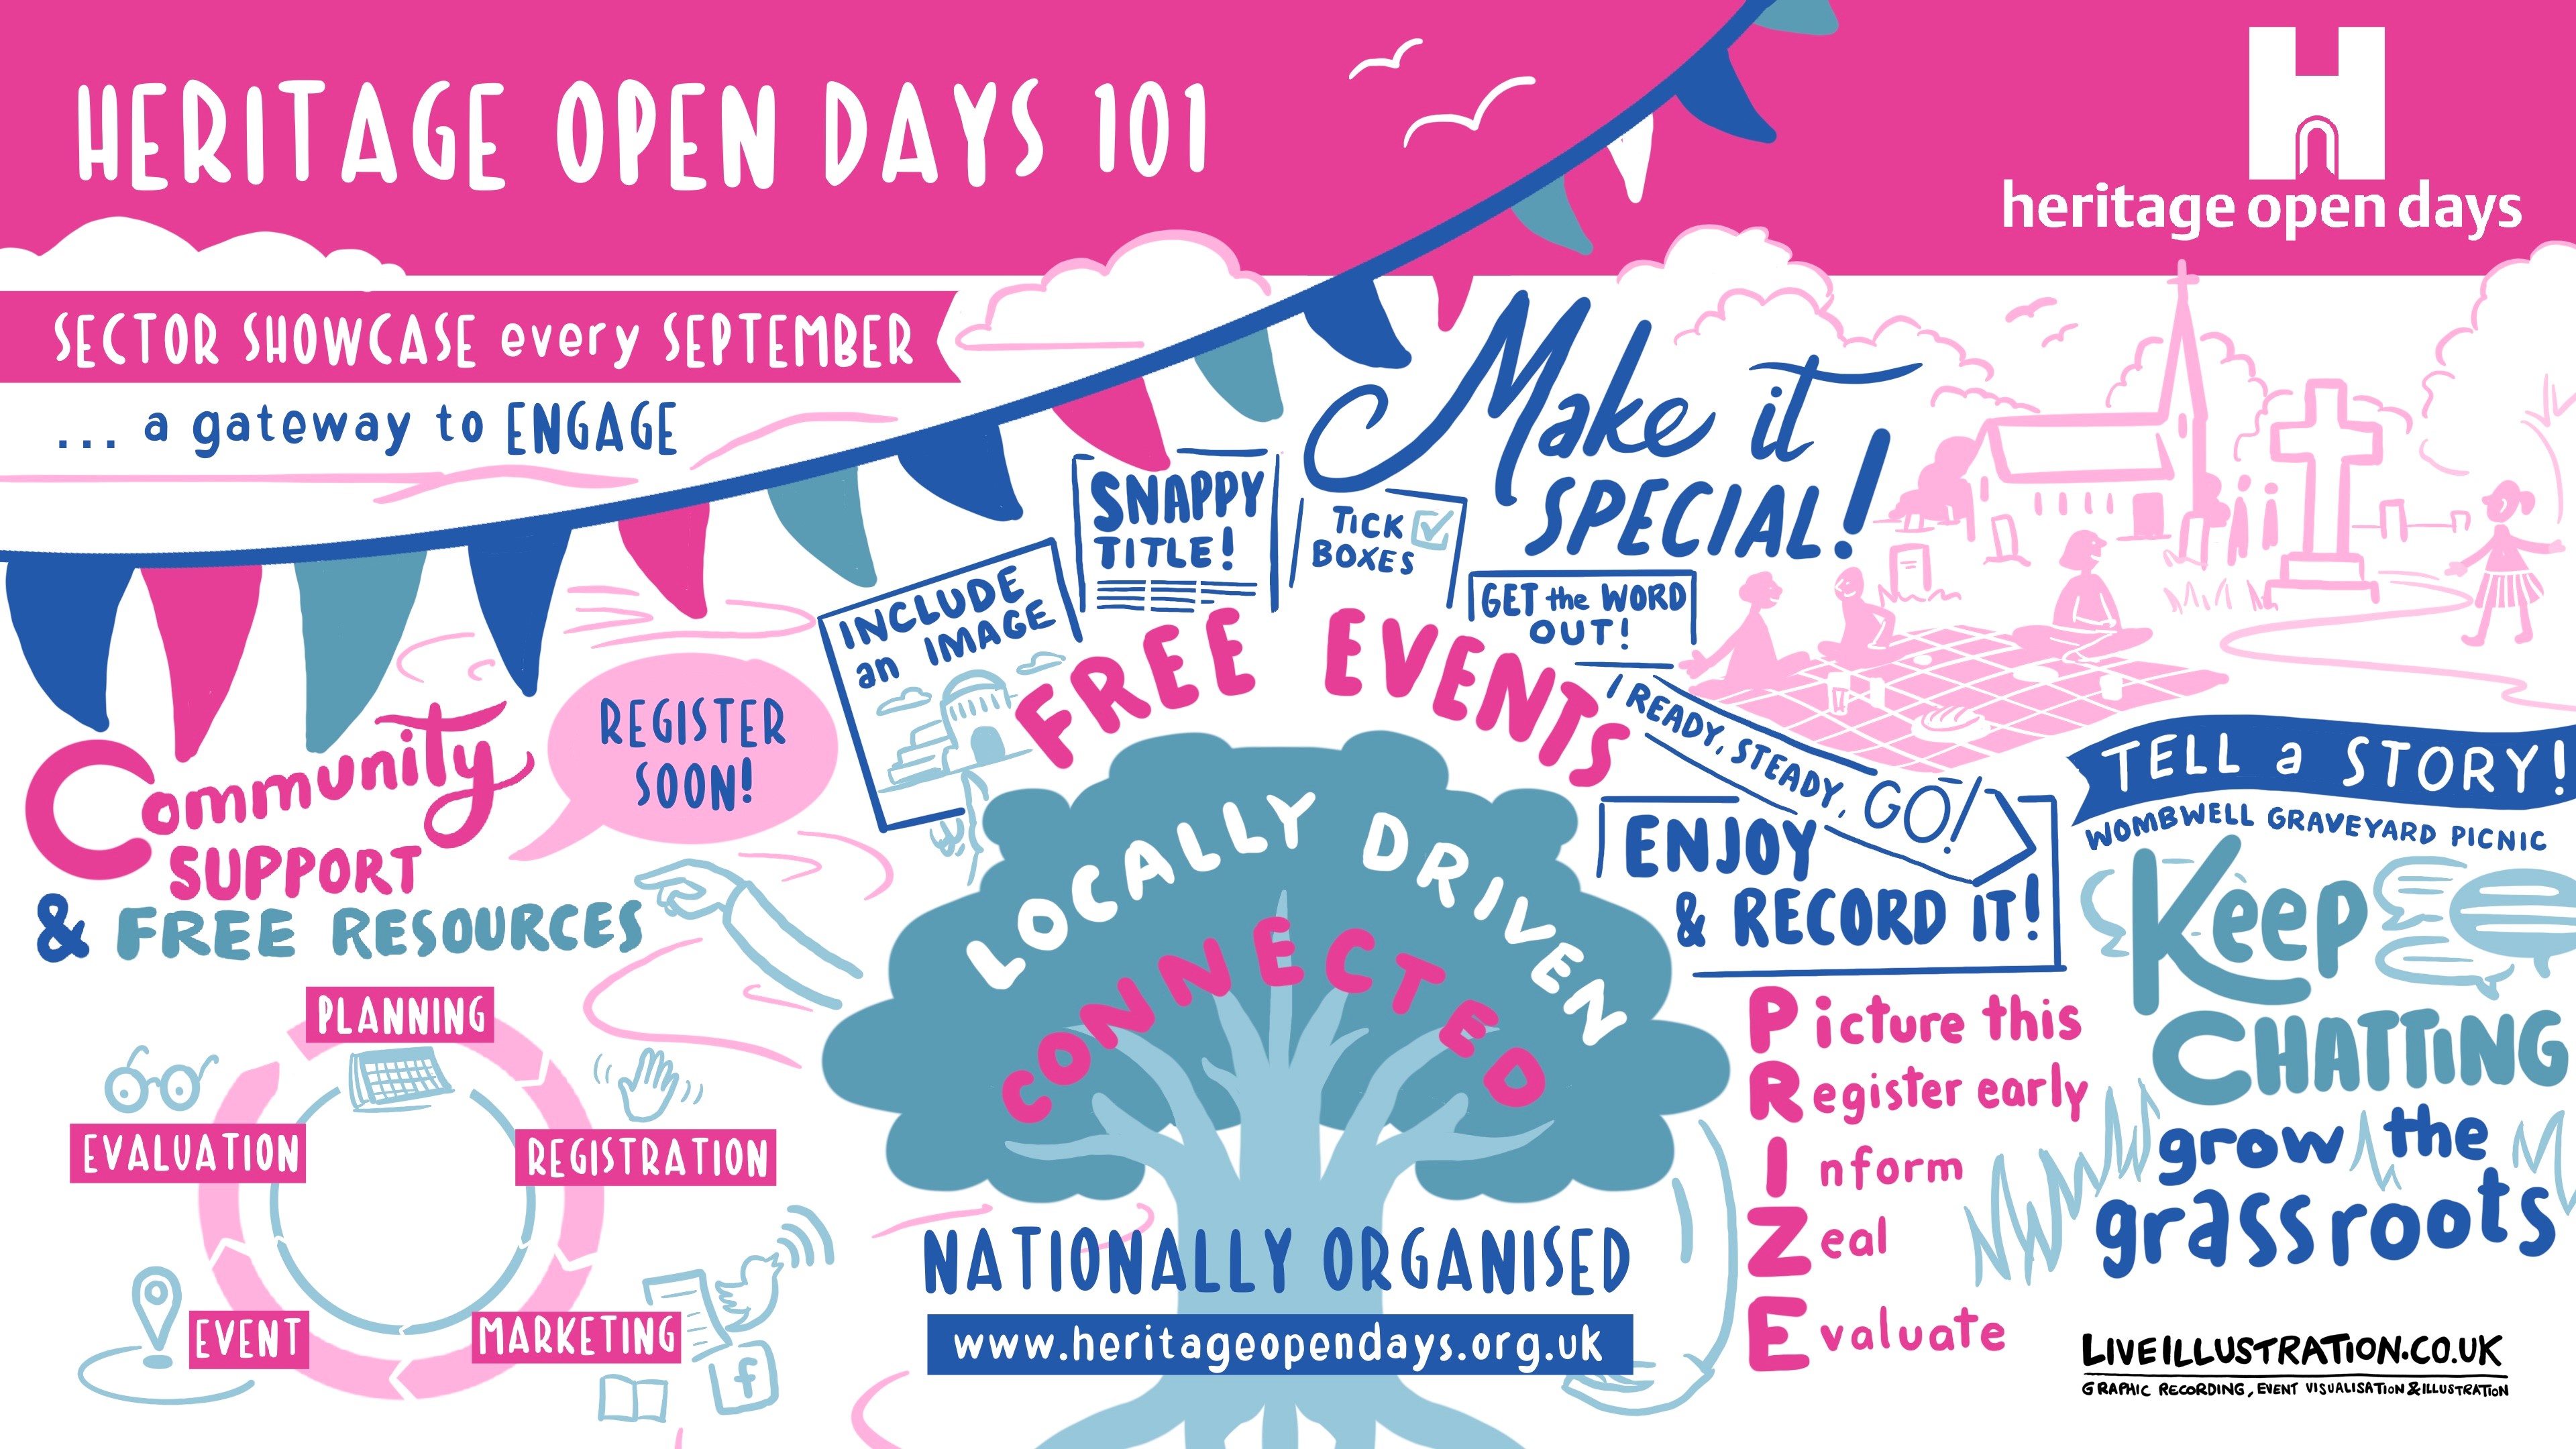 Illustrated meeting notes highlighting tips on how to take part in Heritage Open Days.